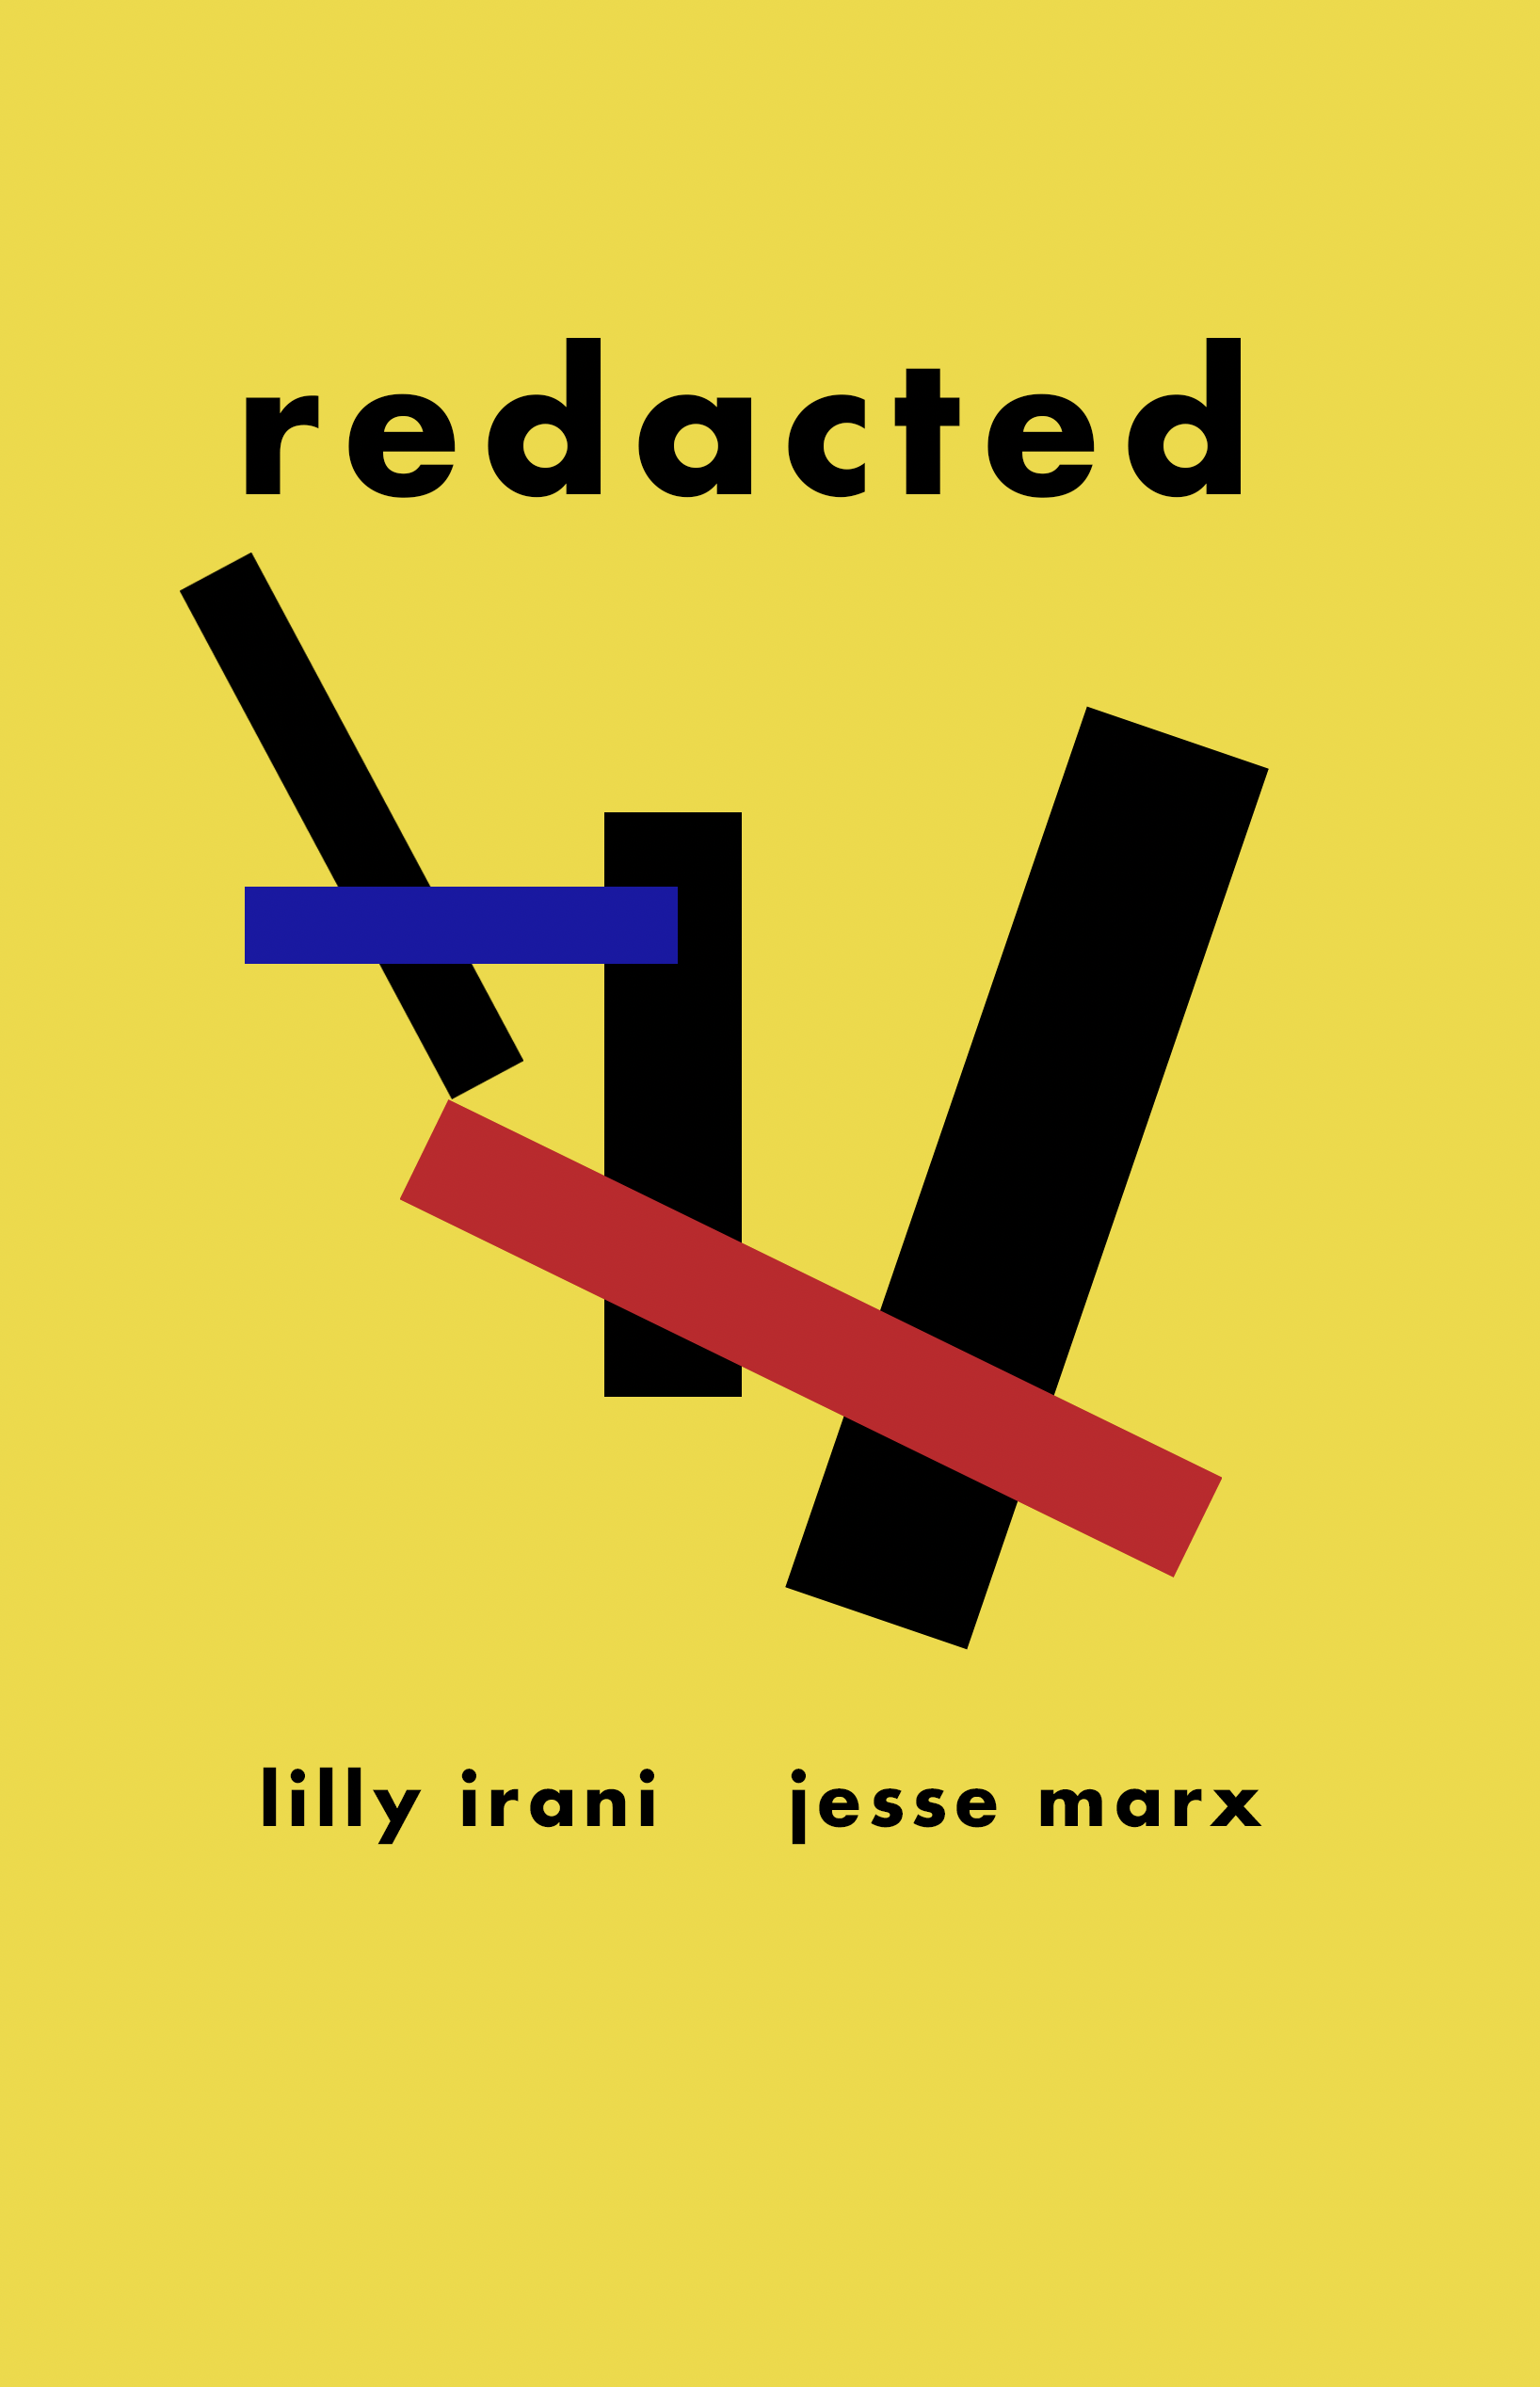 Cover of Irani's book Redacted: bright yellow with red, black, and blue modern shape art 